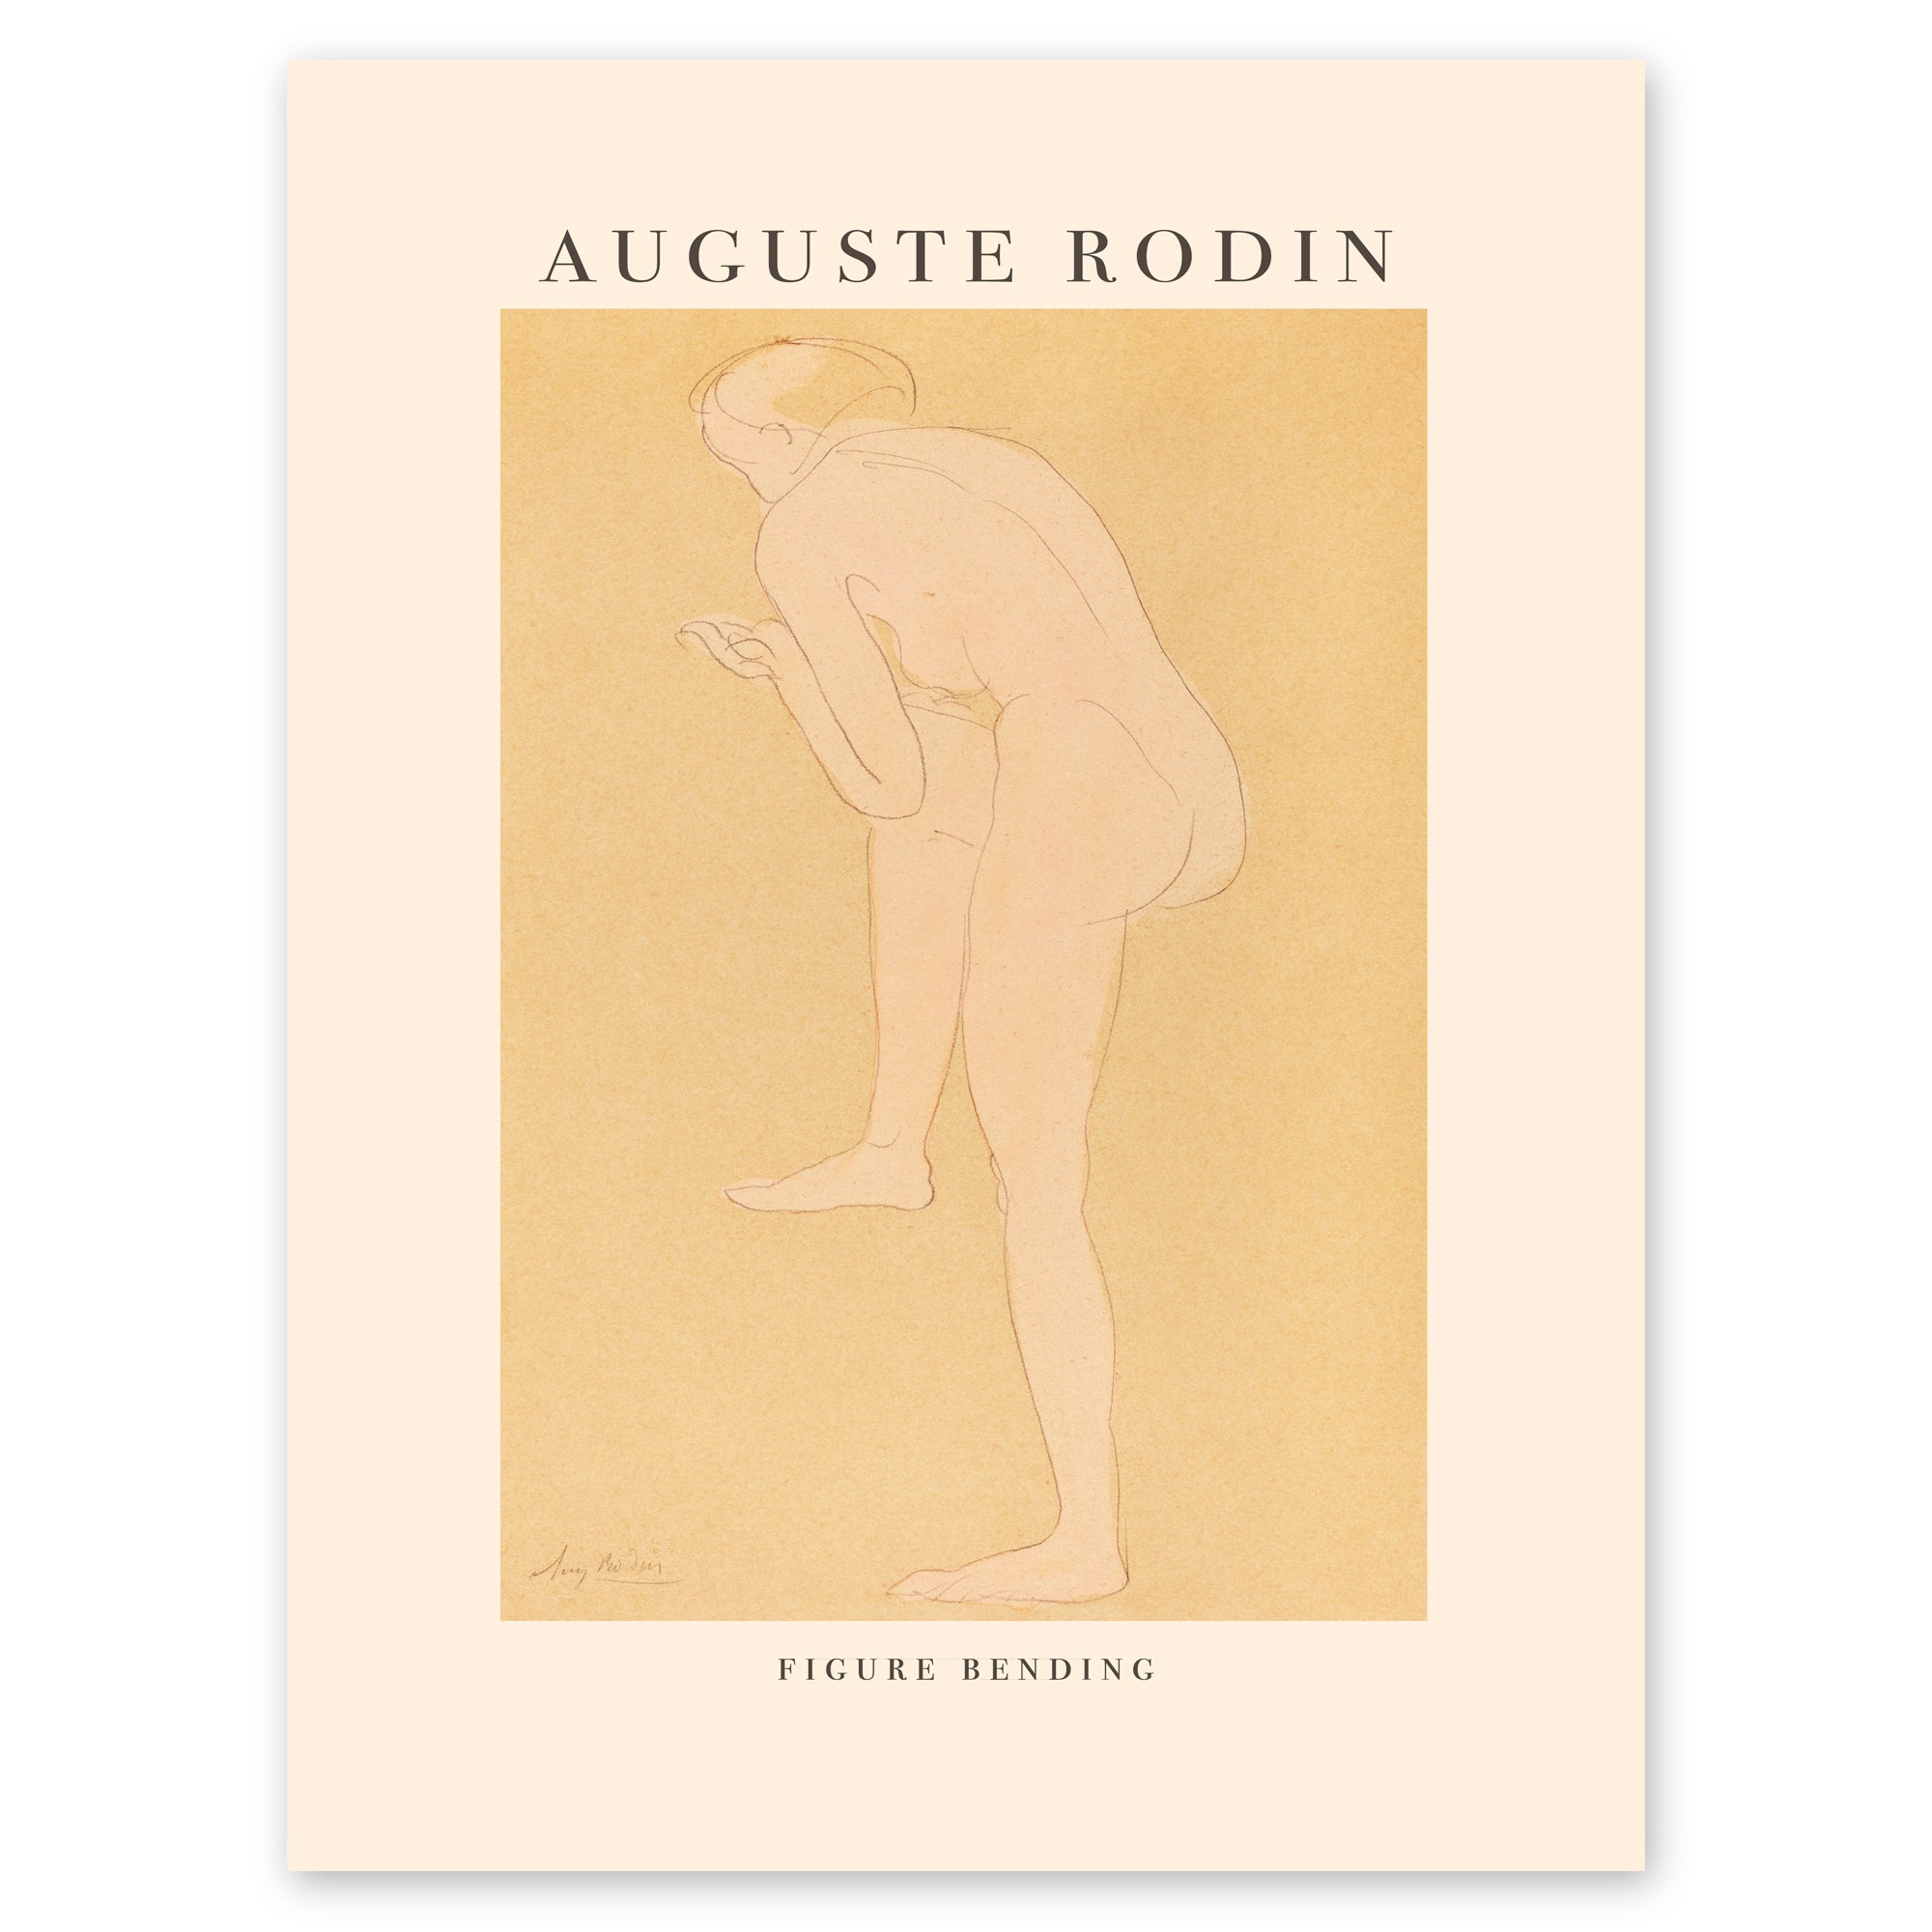 Poster. Watercolor and pencil by Auguste Rodin